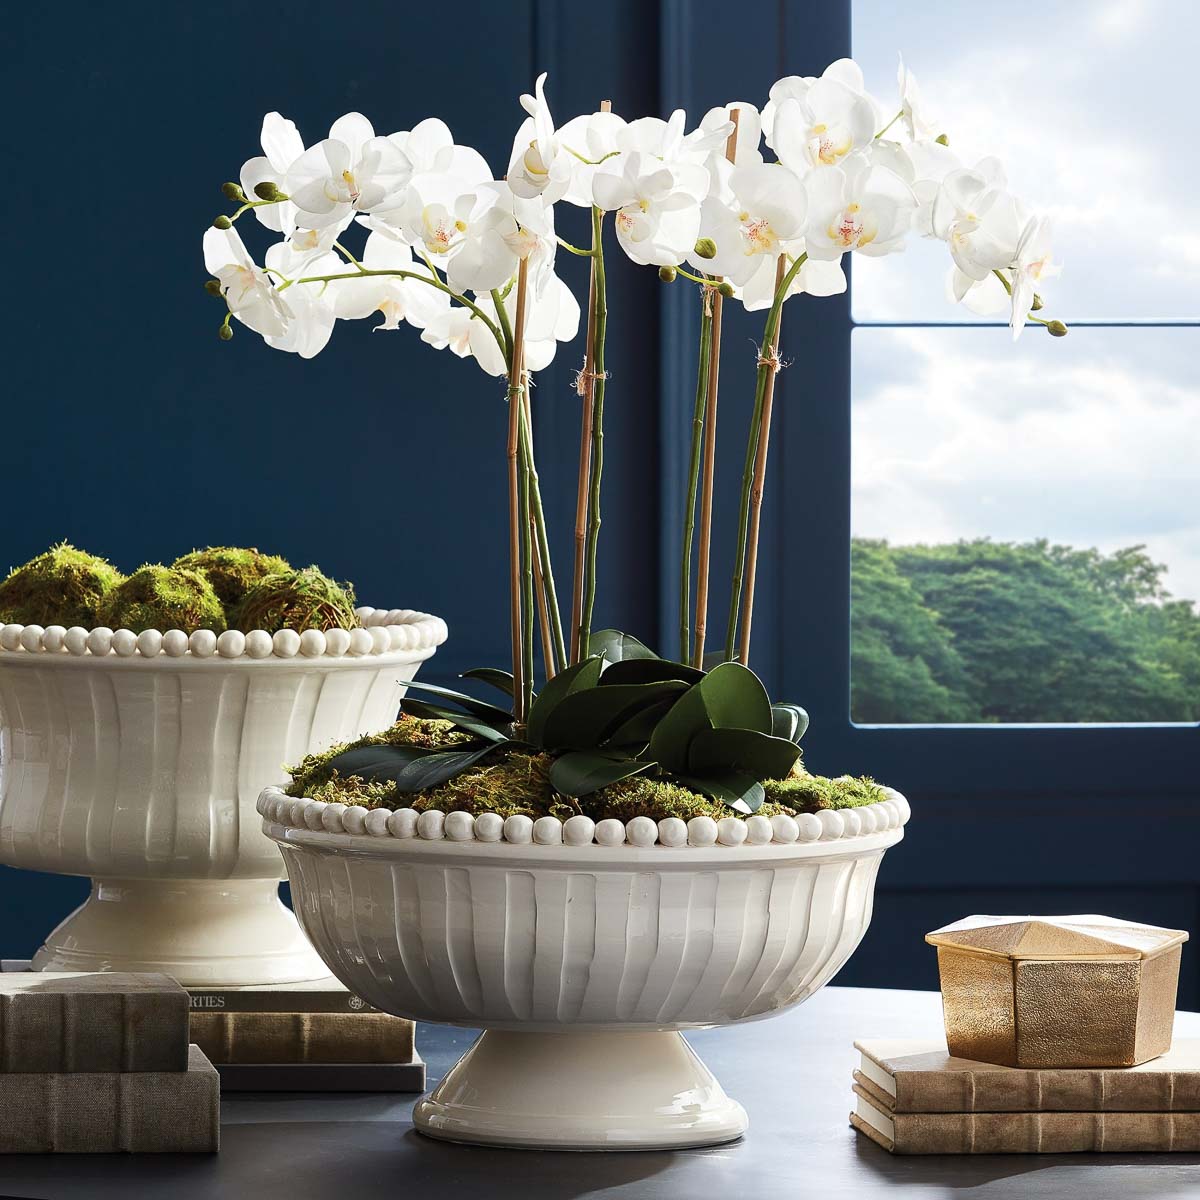 Dining table centerpiece of orchids in footed bowl